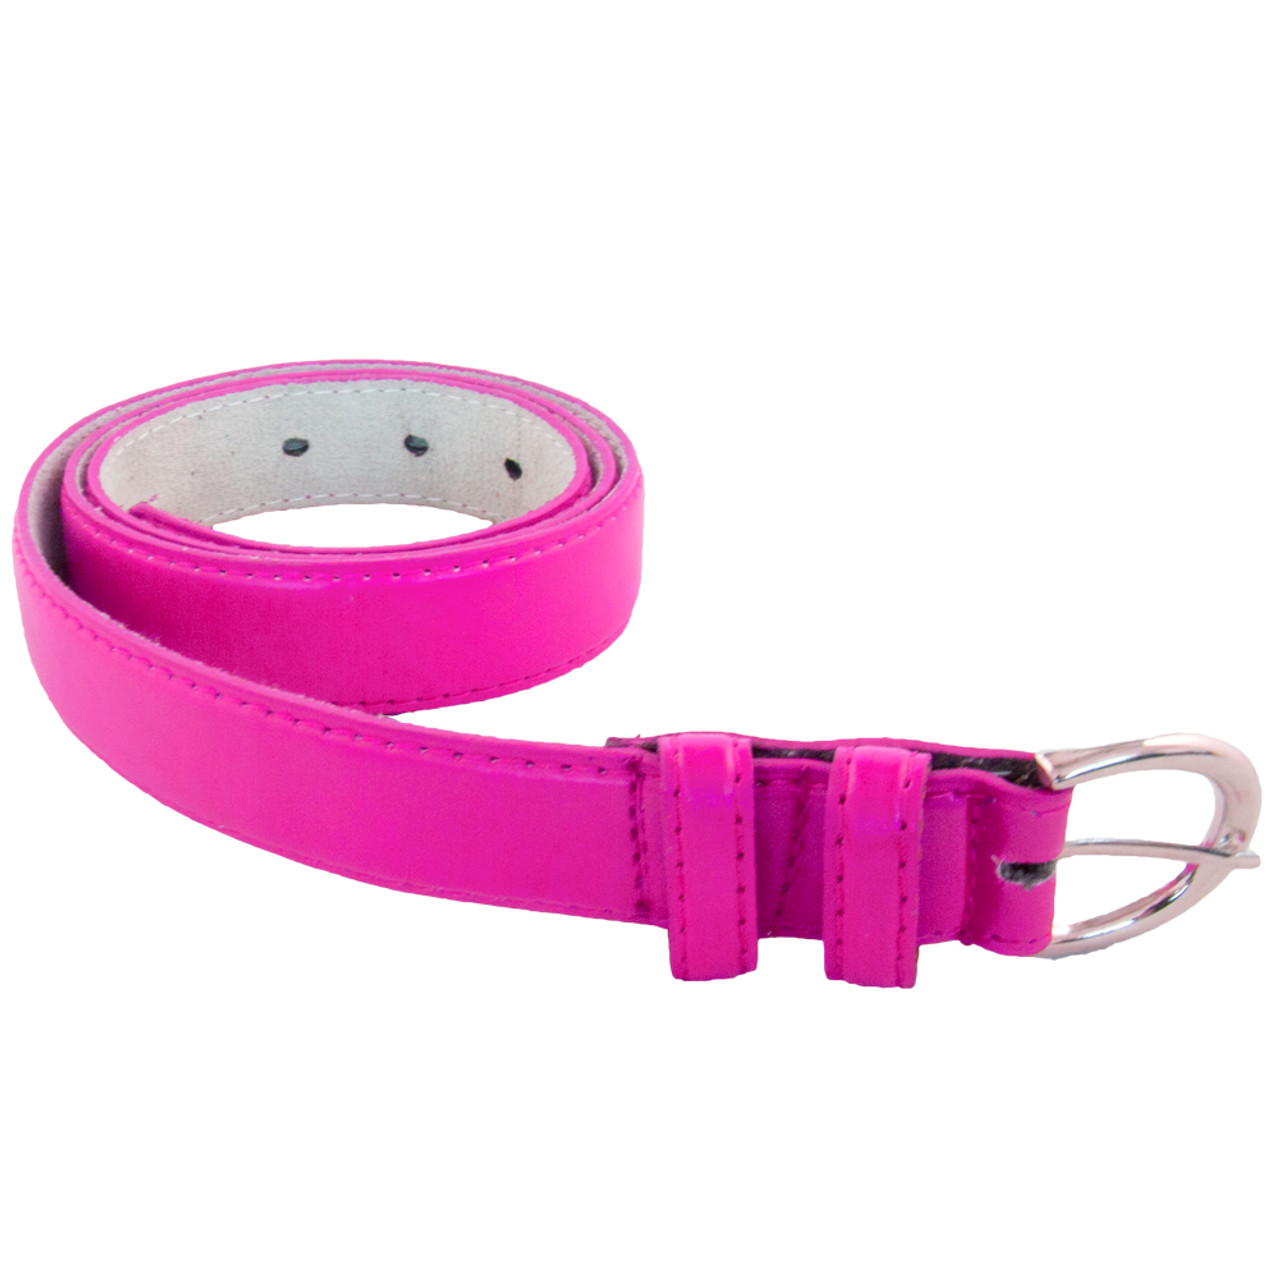 12 PACK Hot Pink 1 Inch Skinny Belts Mix Sizes 2628AH